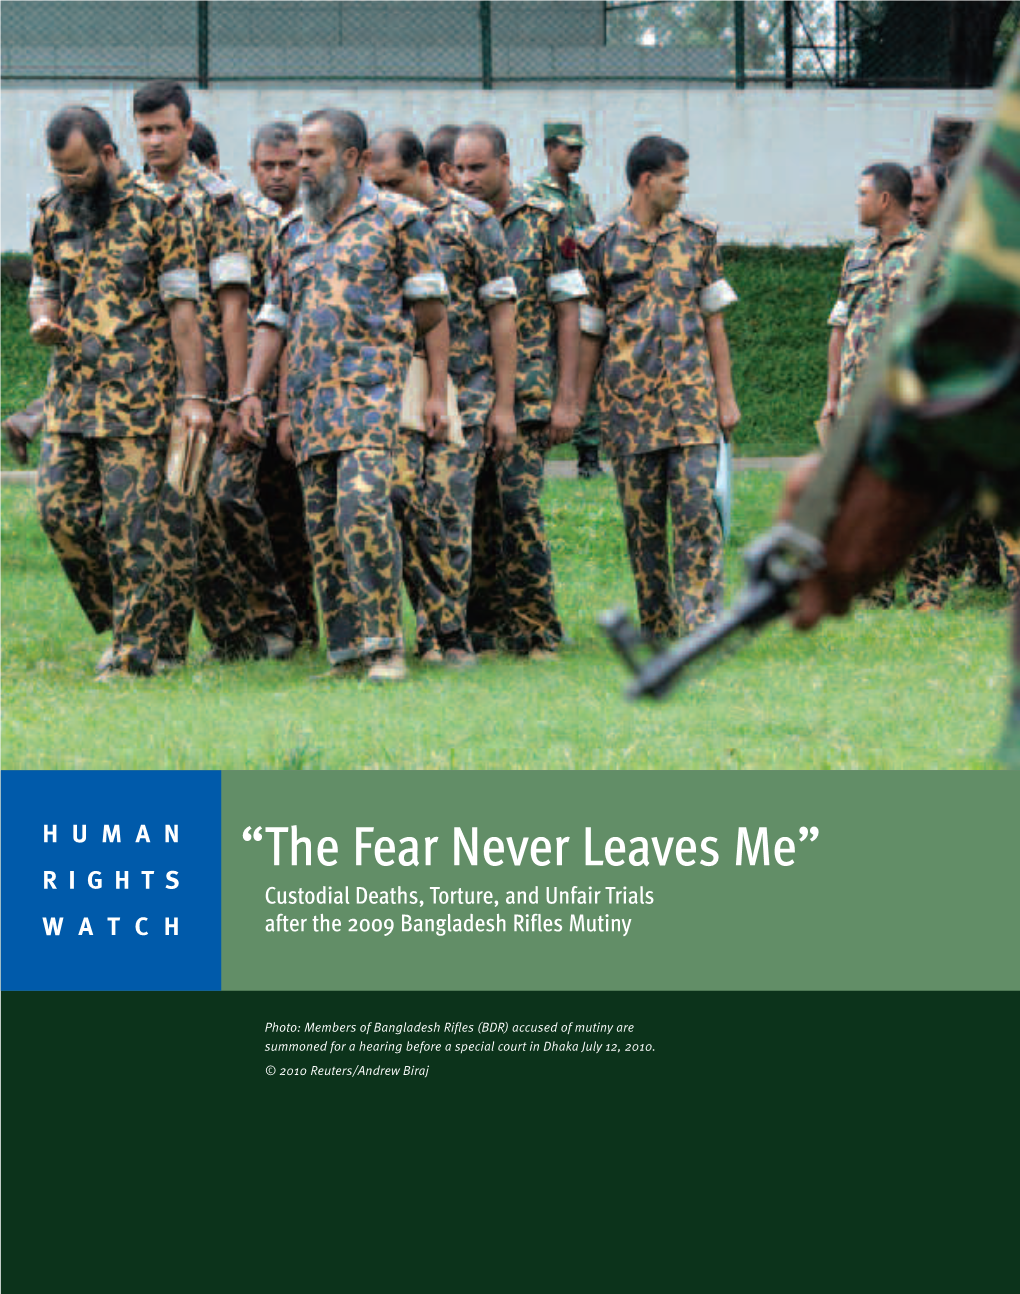 “The Fear Never Leaves Me” RIGHTS Custodial Deaths, Torture, and Unfair Trials WATCH After the 2009 Bangladesh Rifles Mutiny